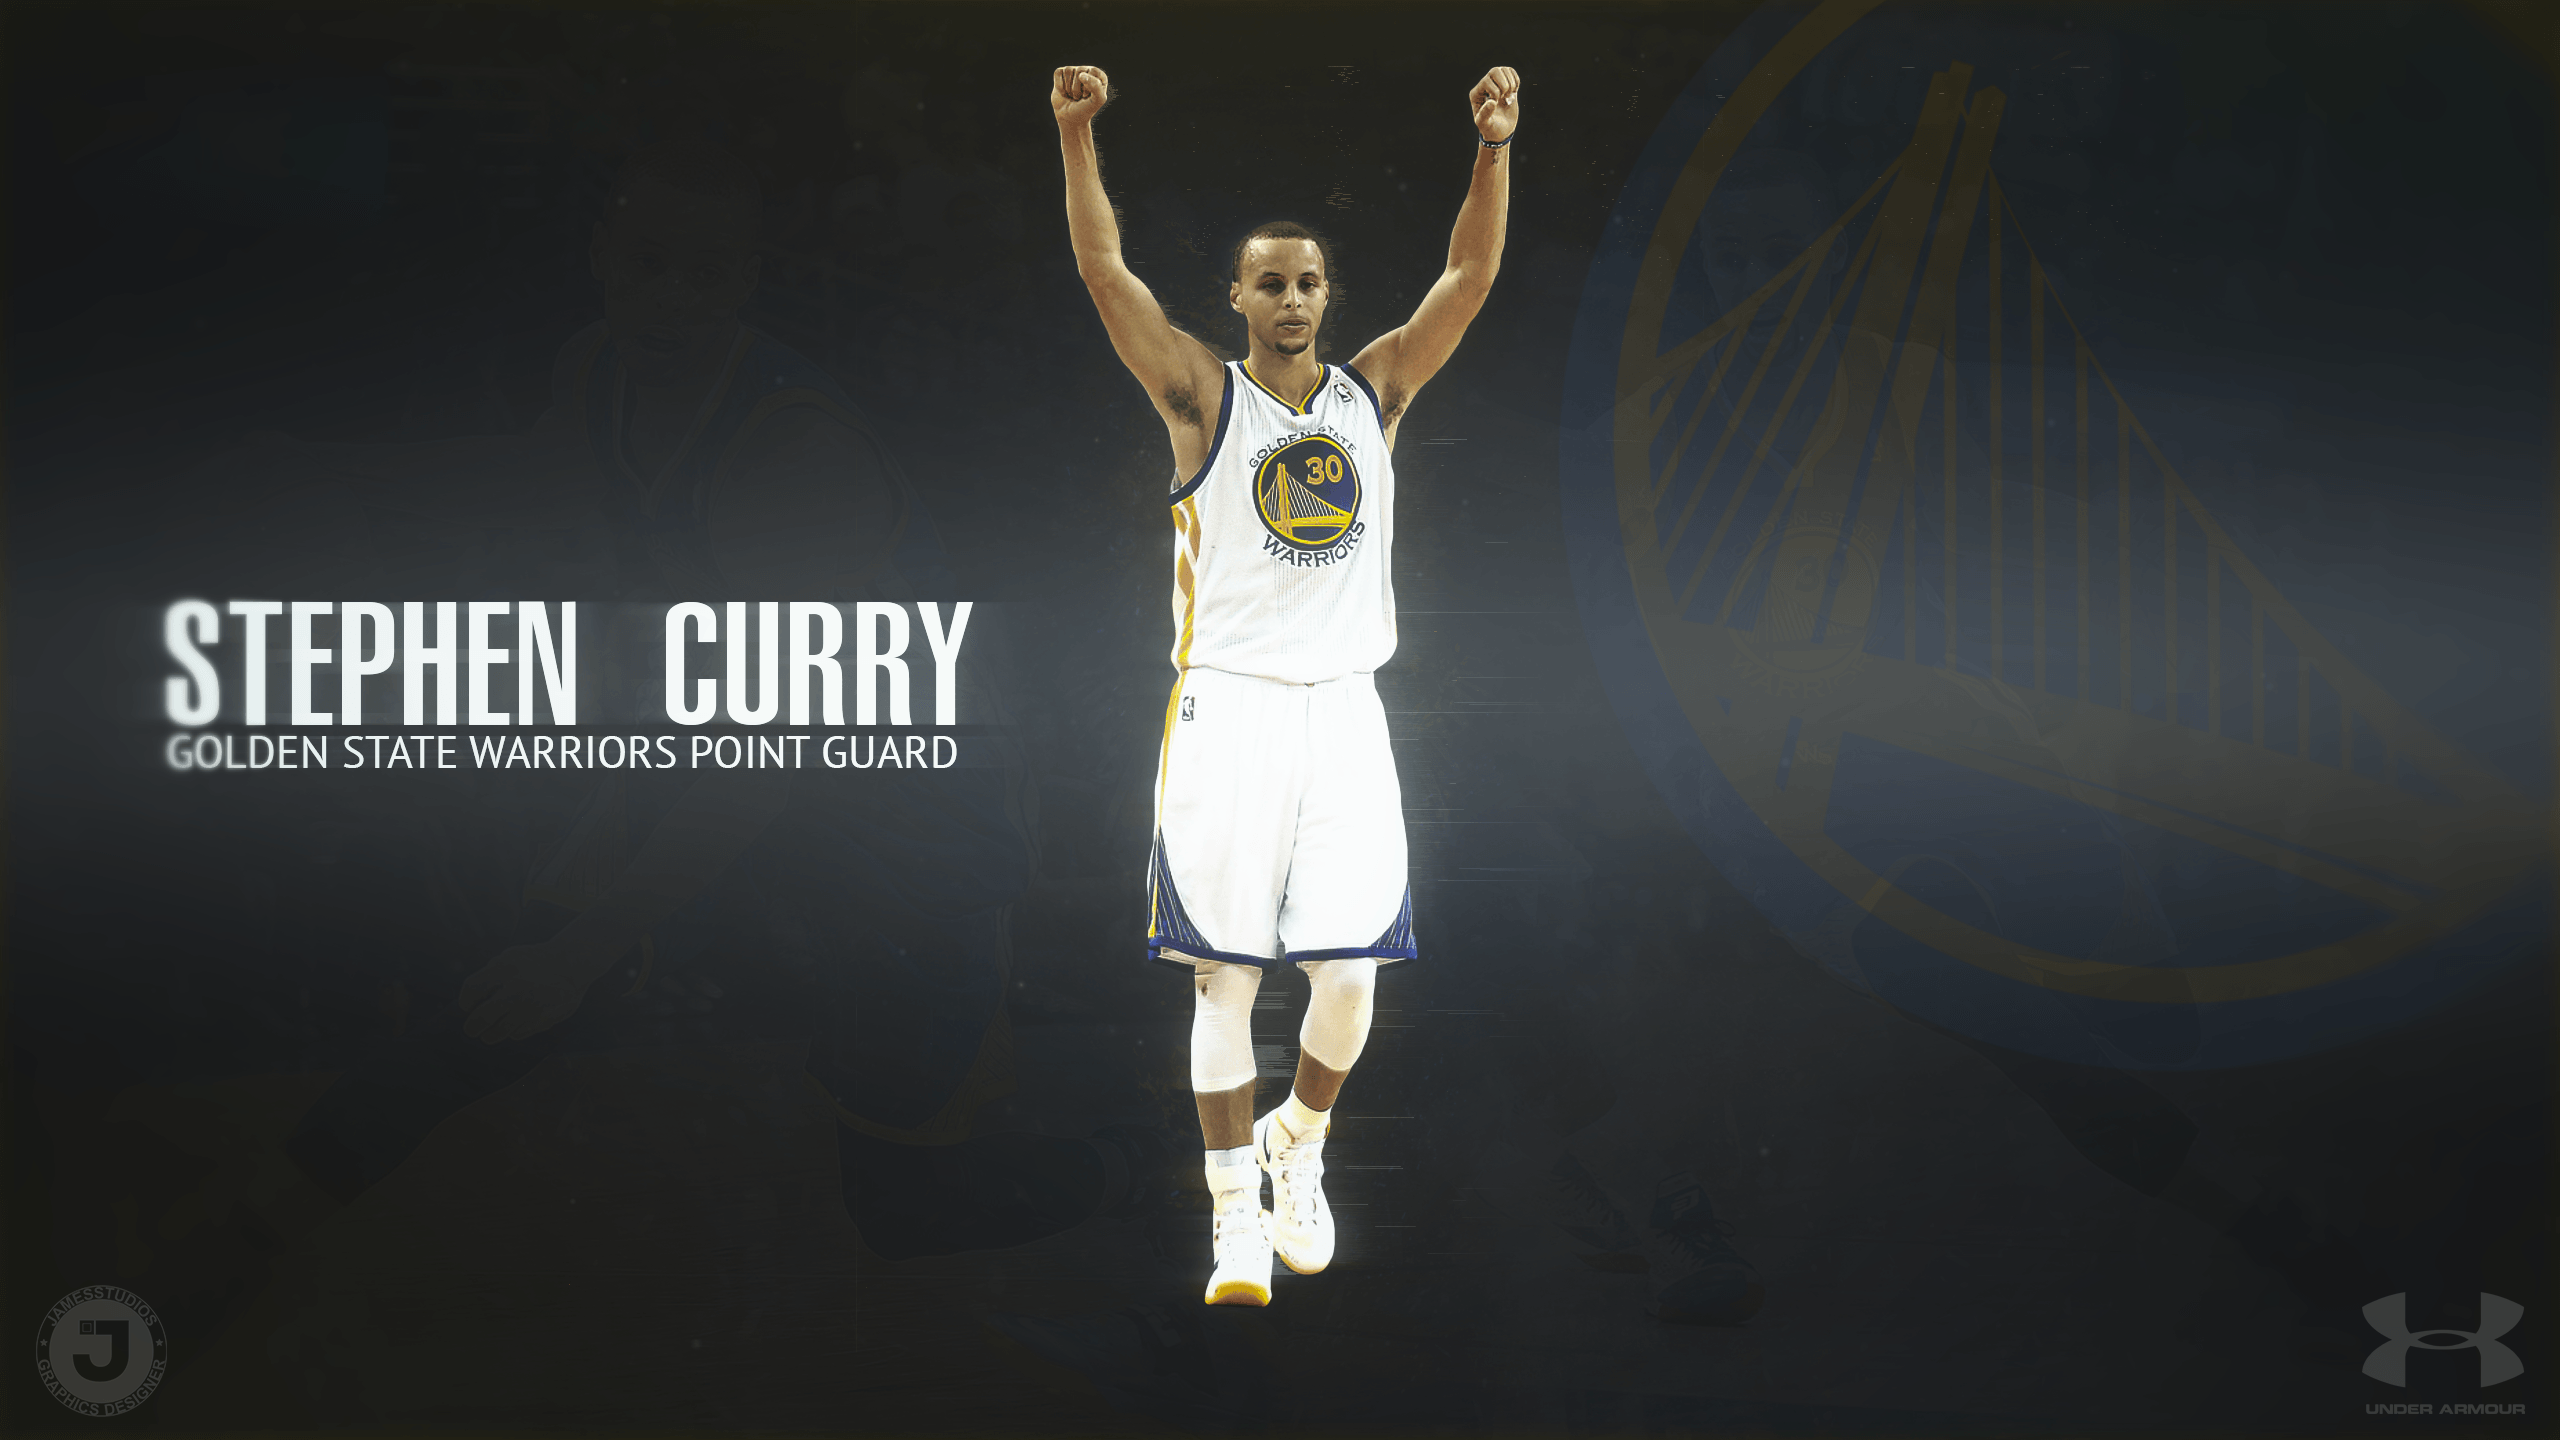 HD Stephen Curry Wallpaper Download